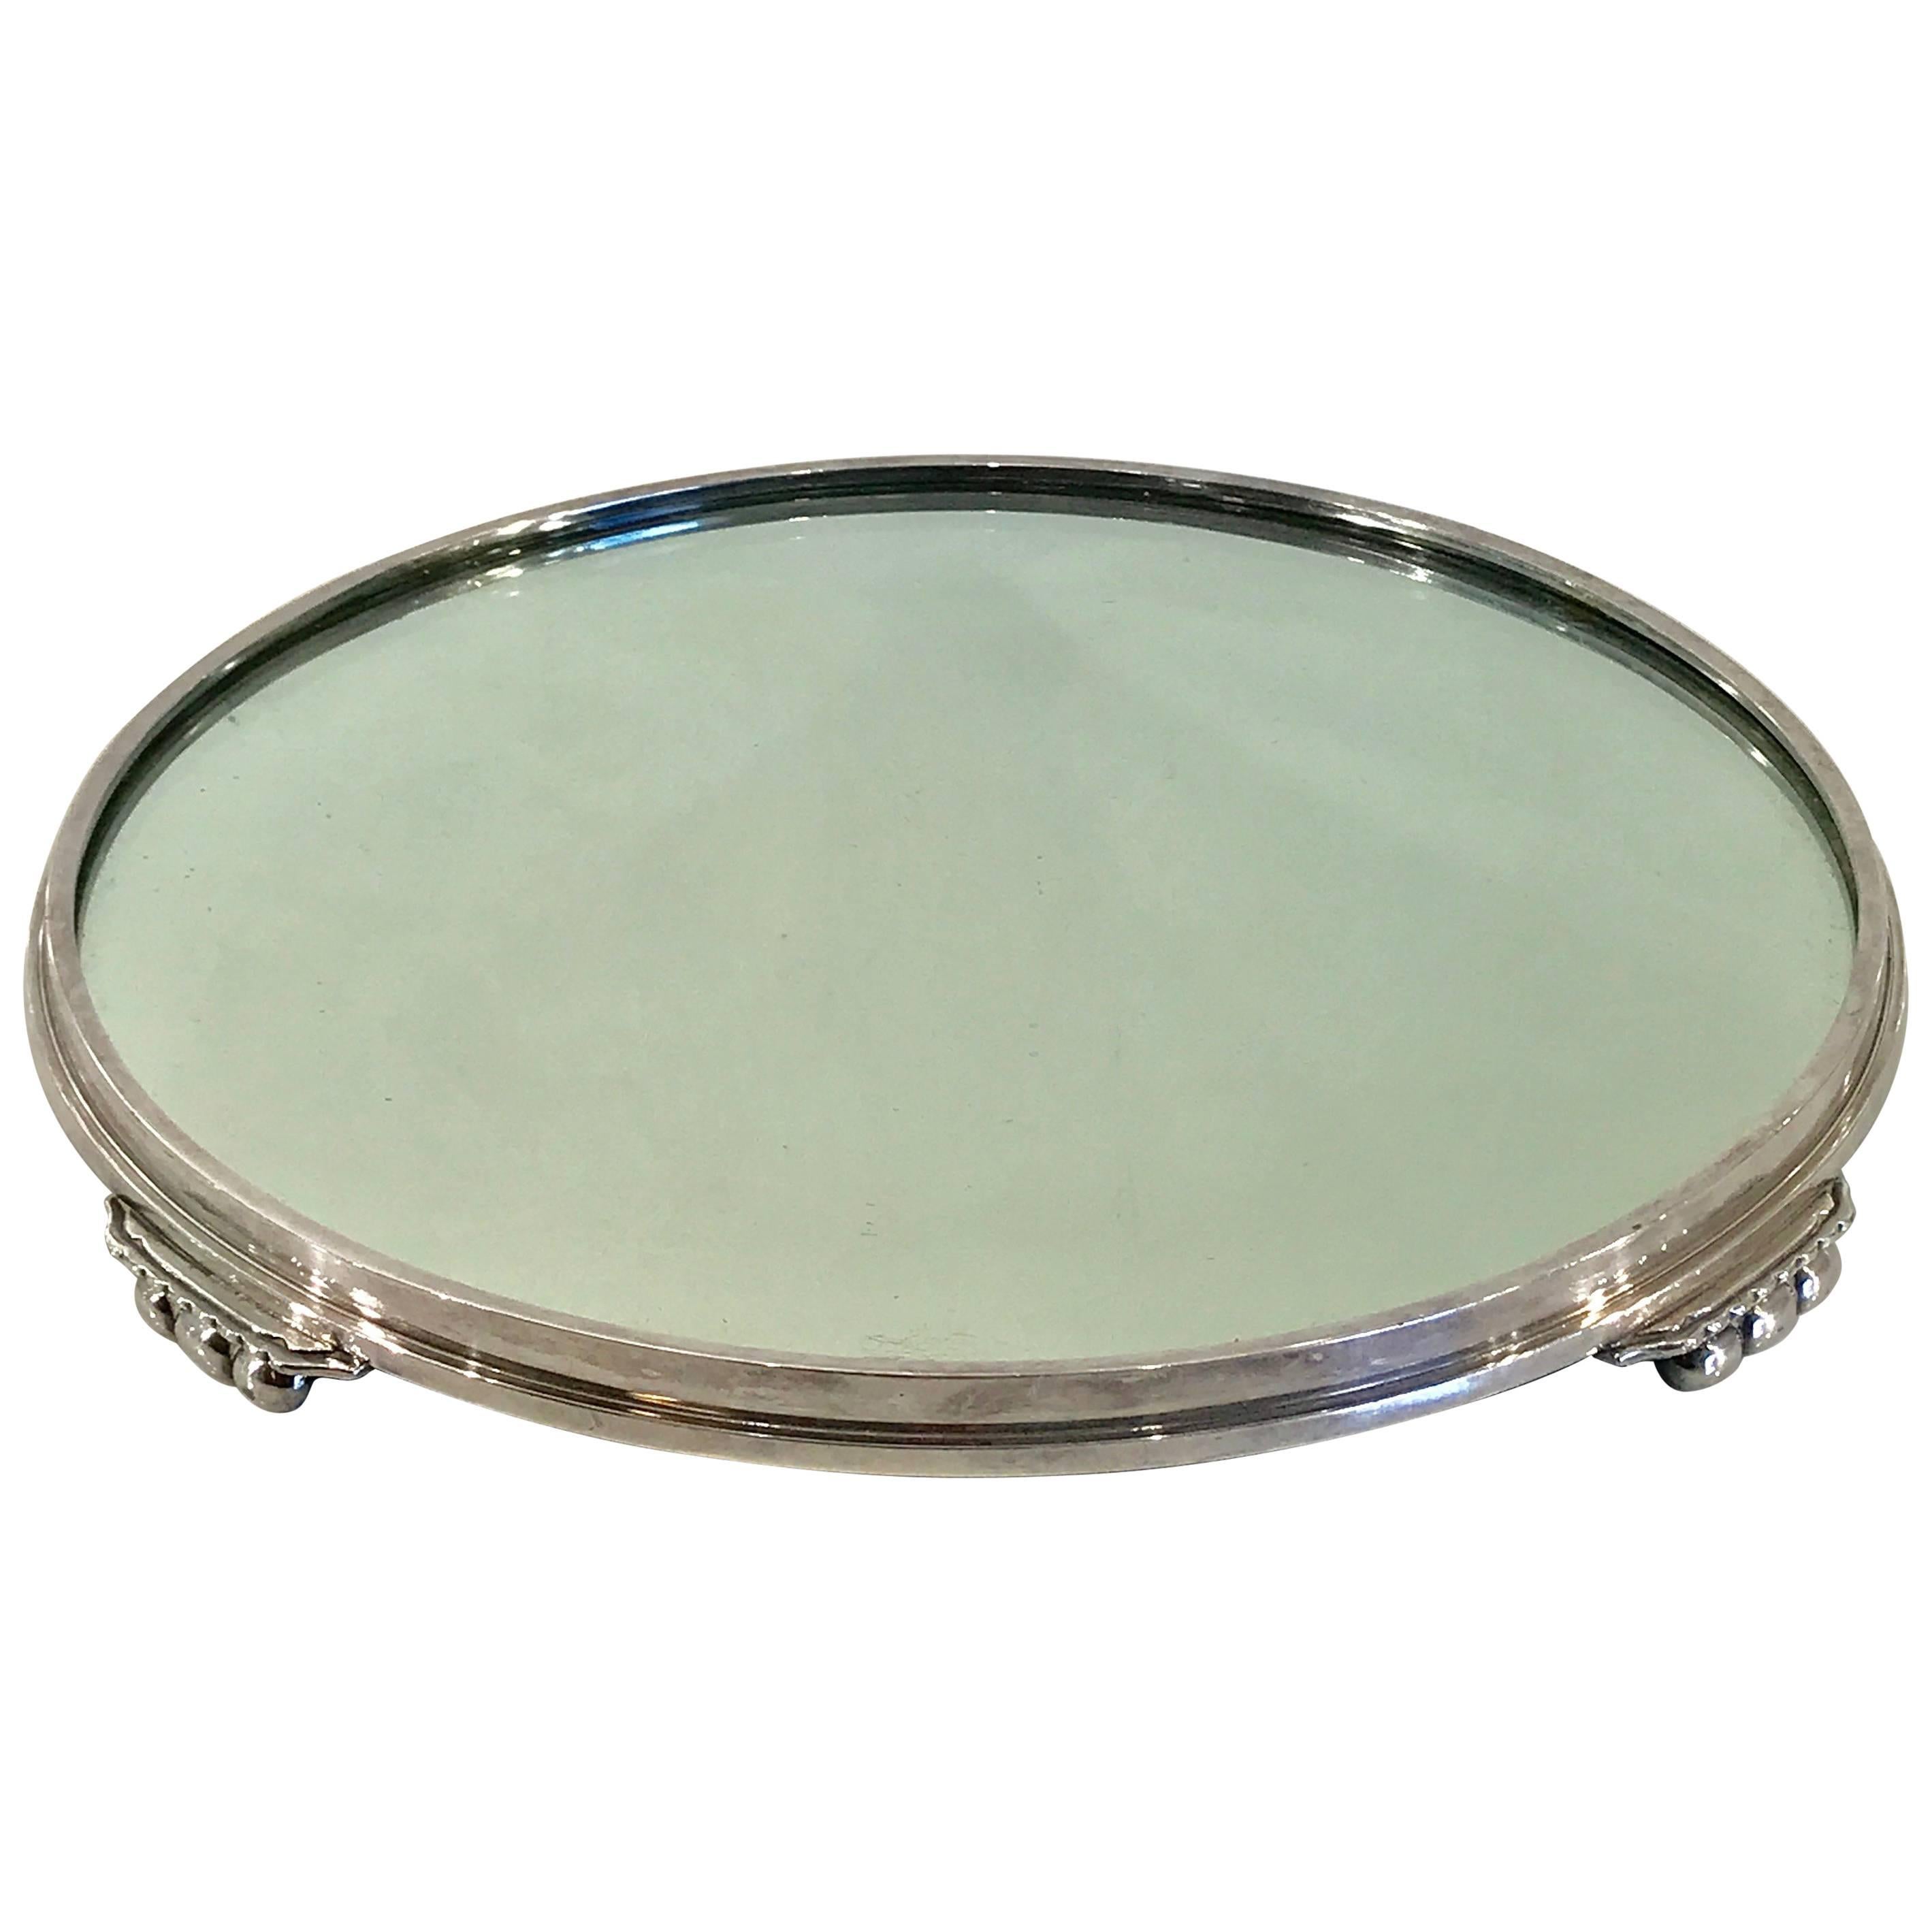 Silver Plated Art Deco Round Mirrored Plateau, by International Silver Co